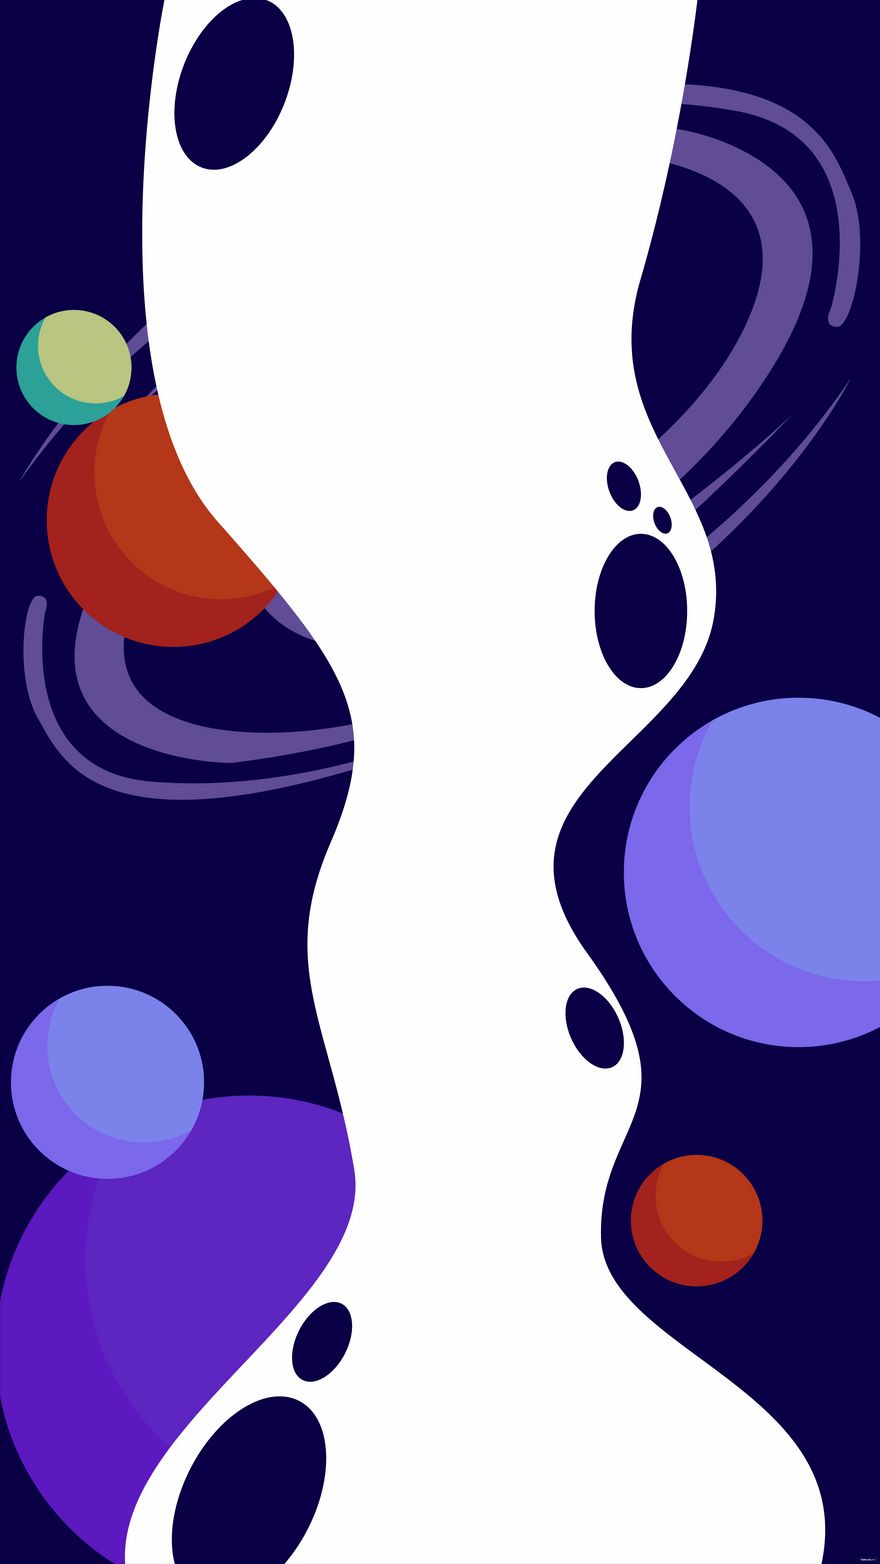 Free Galaxy Phone Background in Illustrator, EPS, SVG